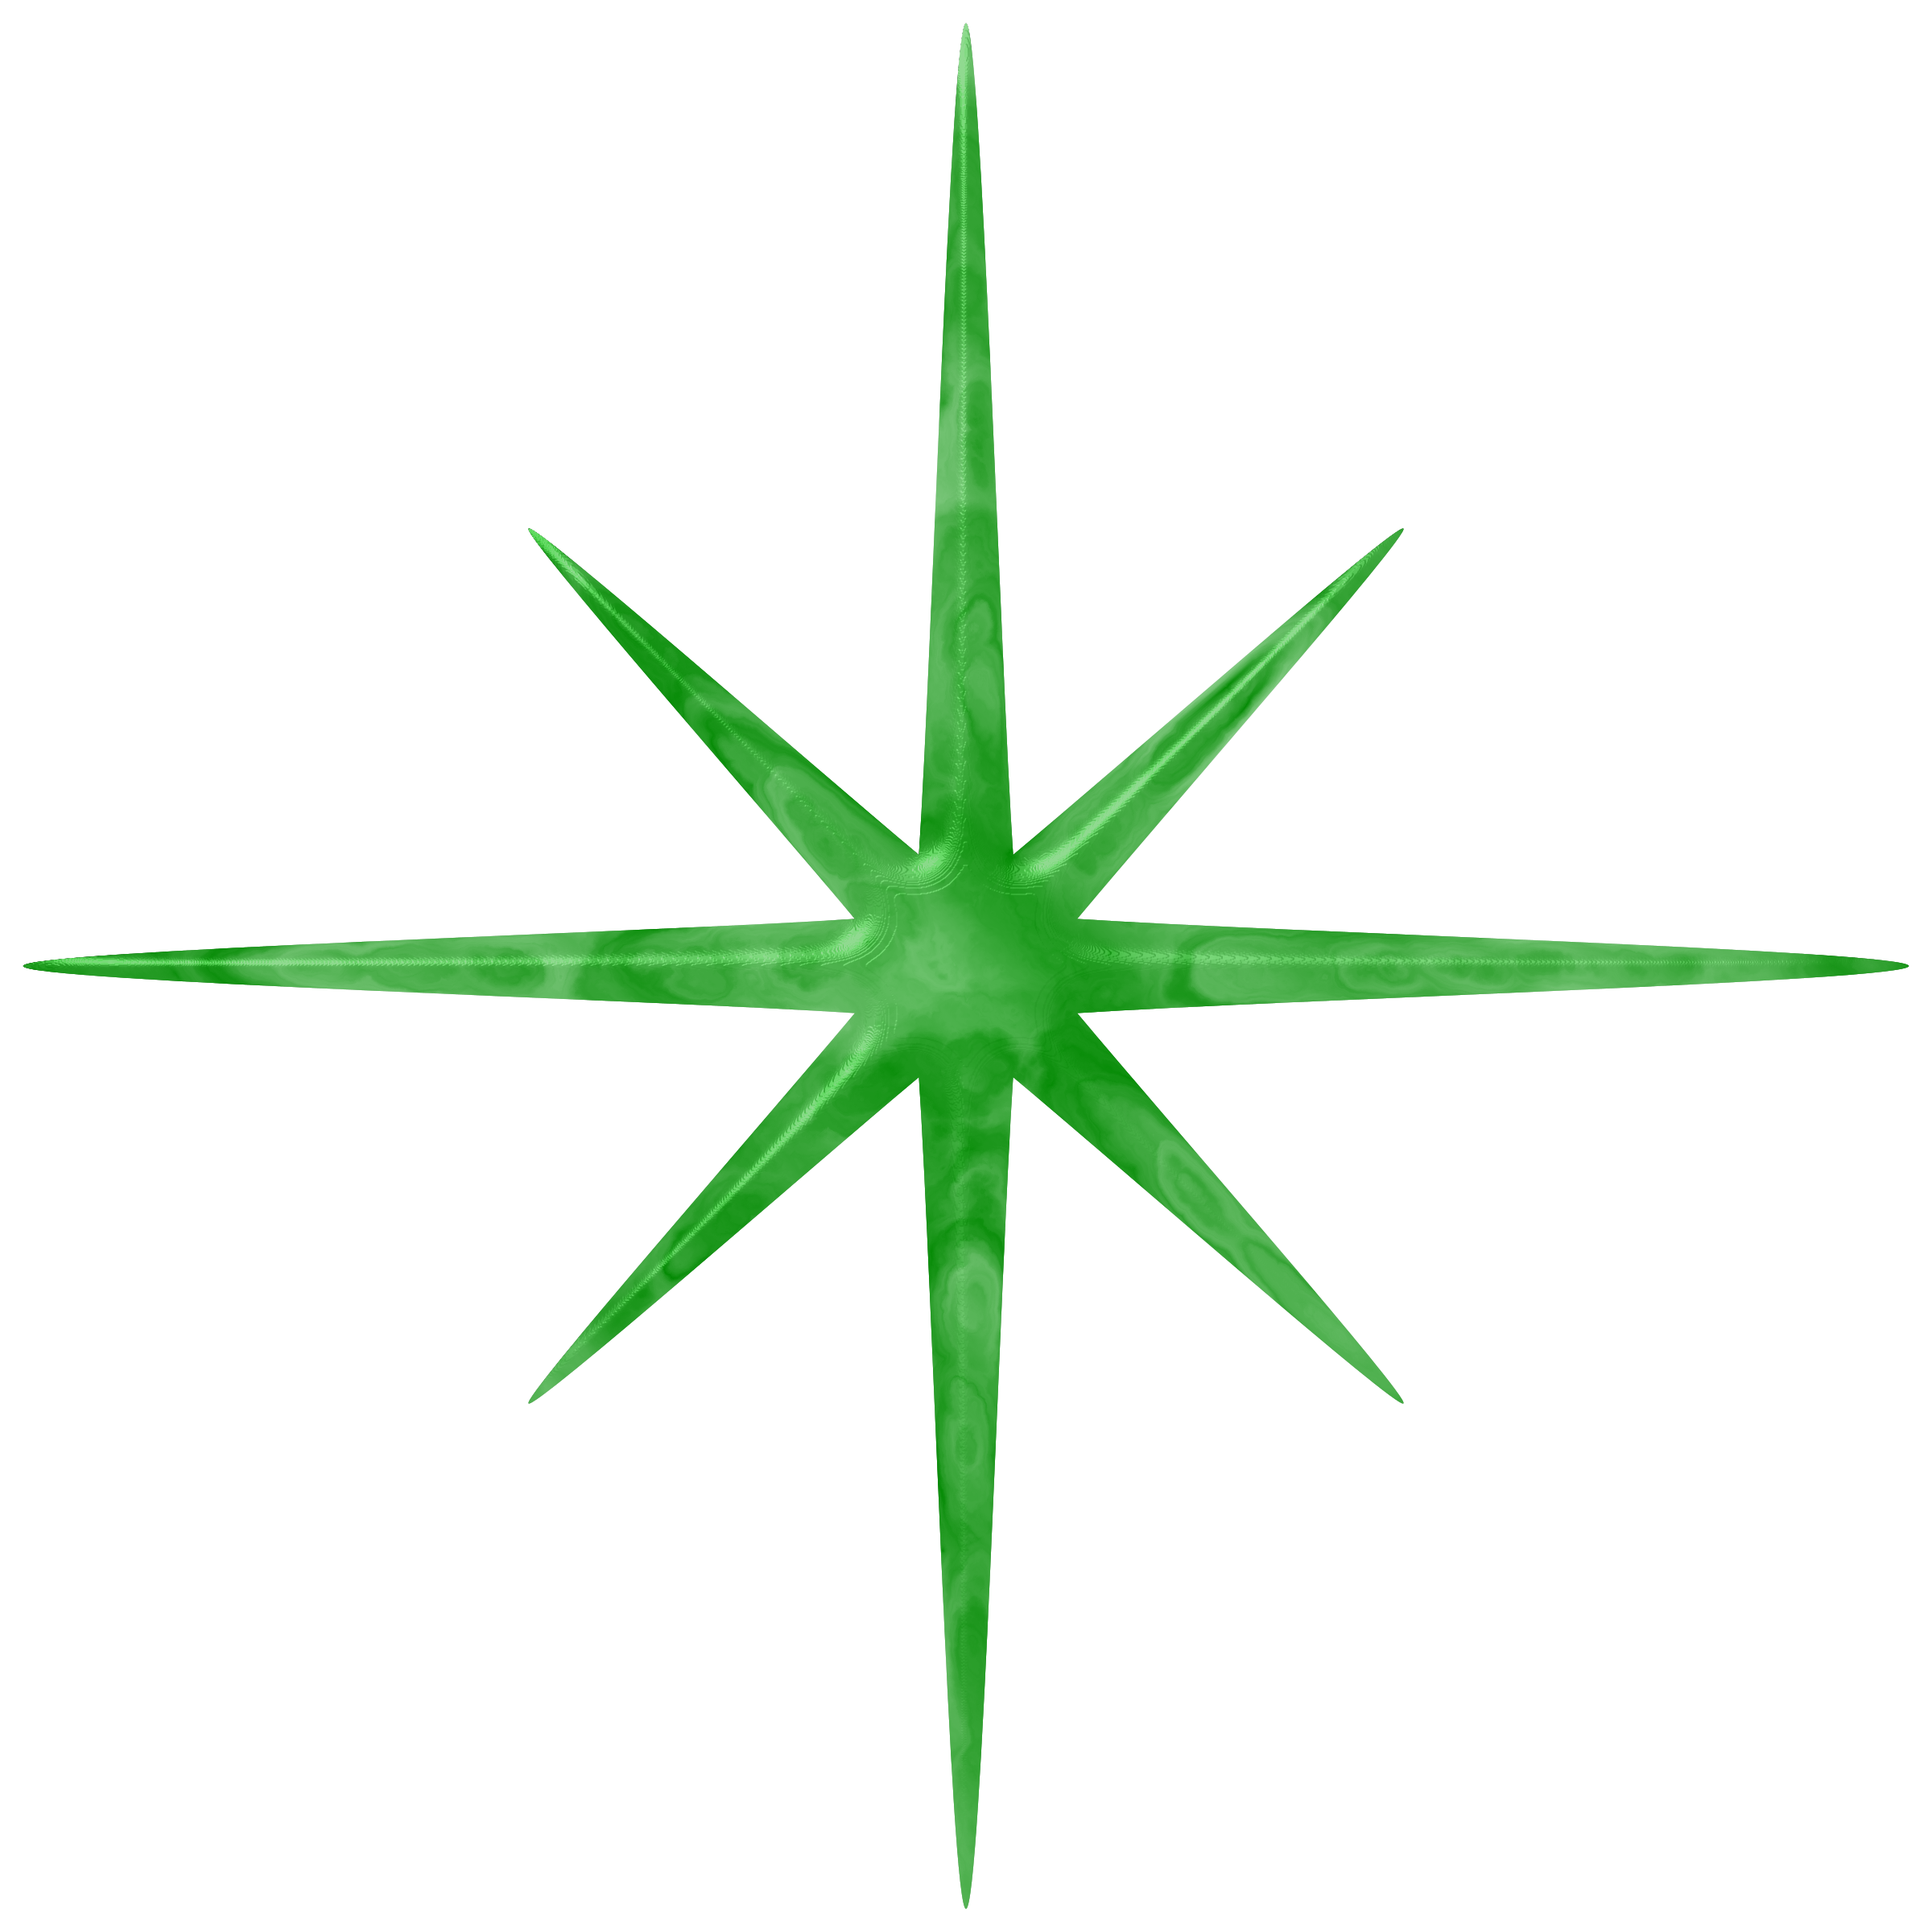 sparkle clipart green star effect download hd #41966